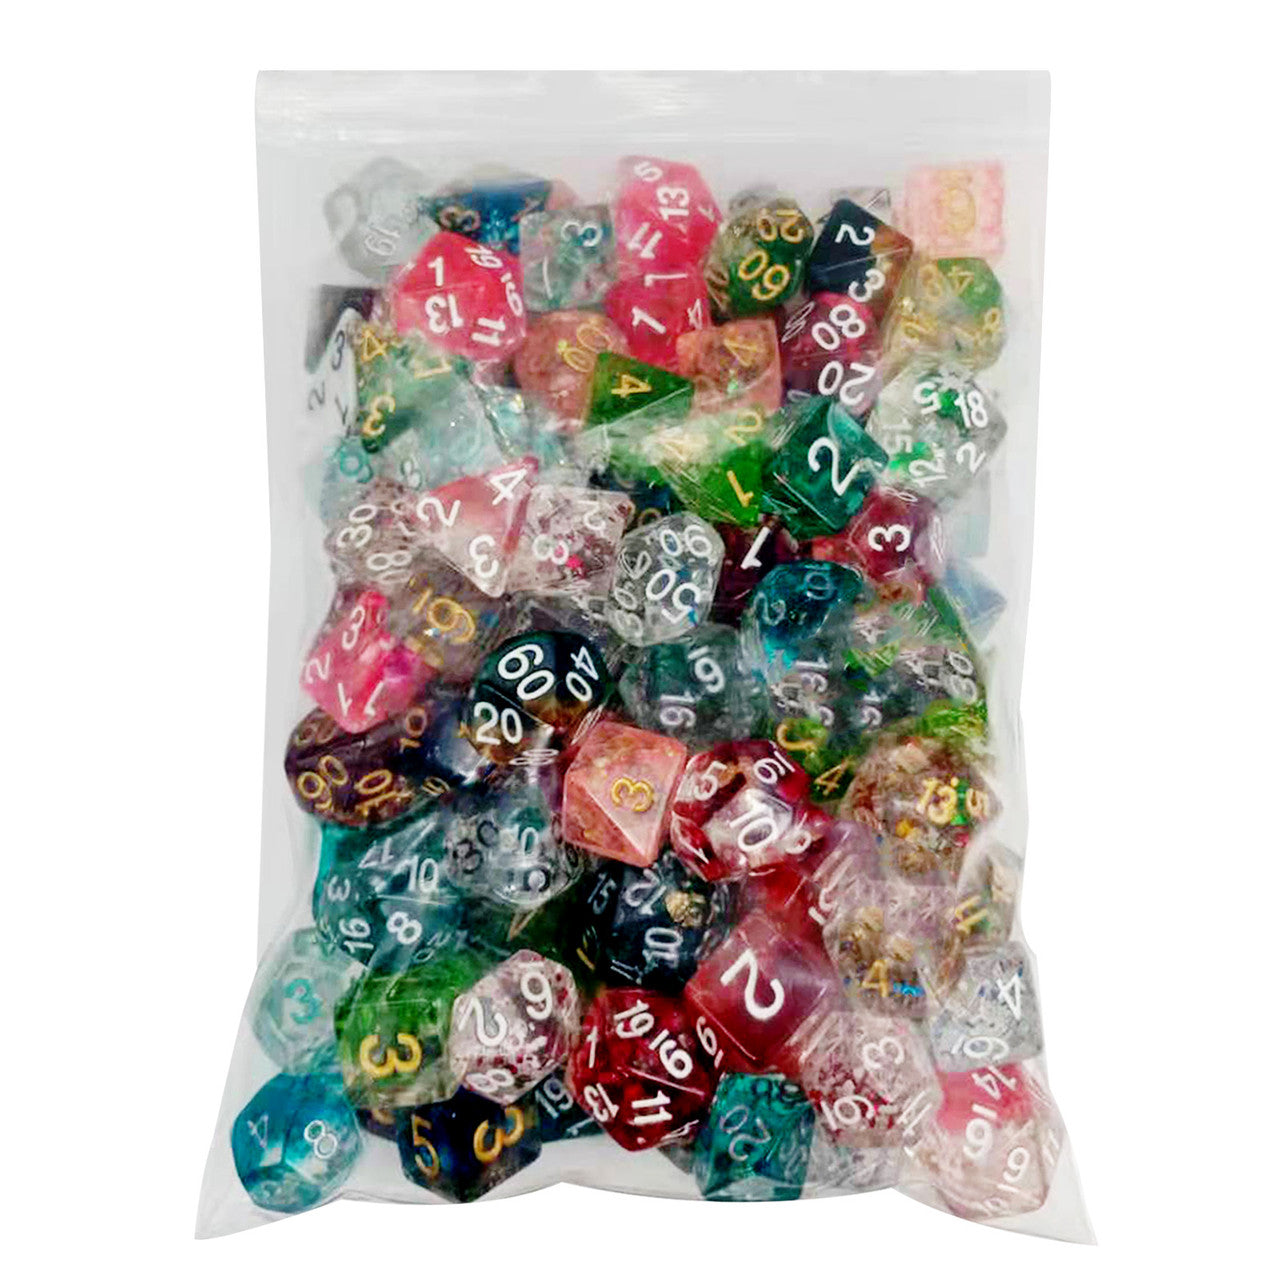  OUKELANWO Polyhedral Resin Lord of The Rings DND Dice